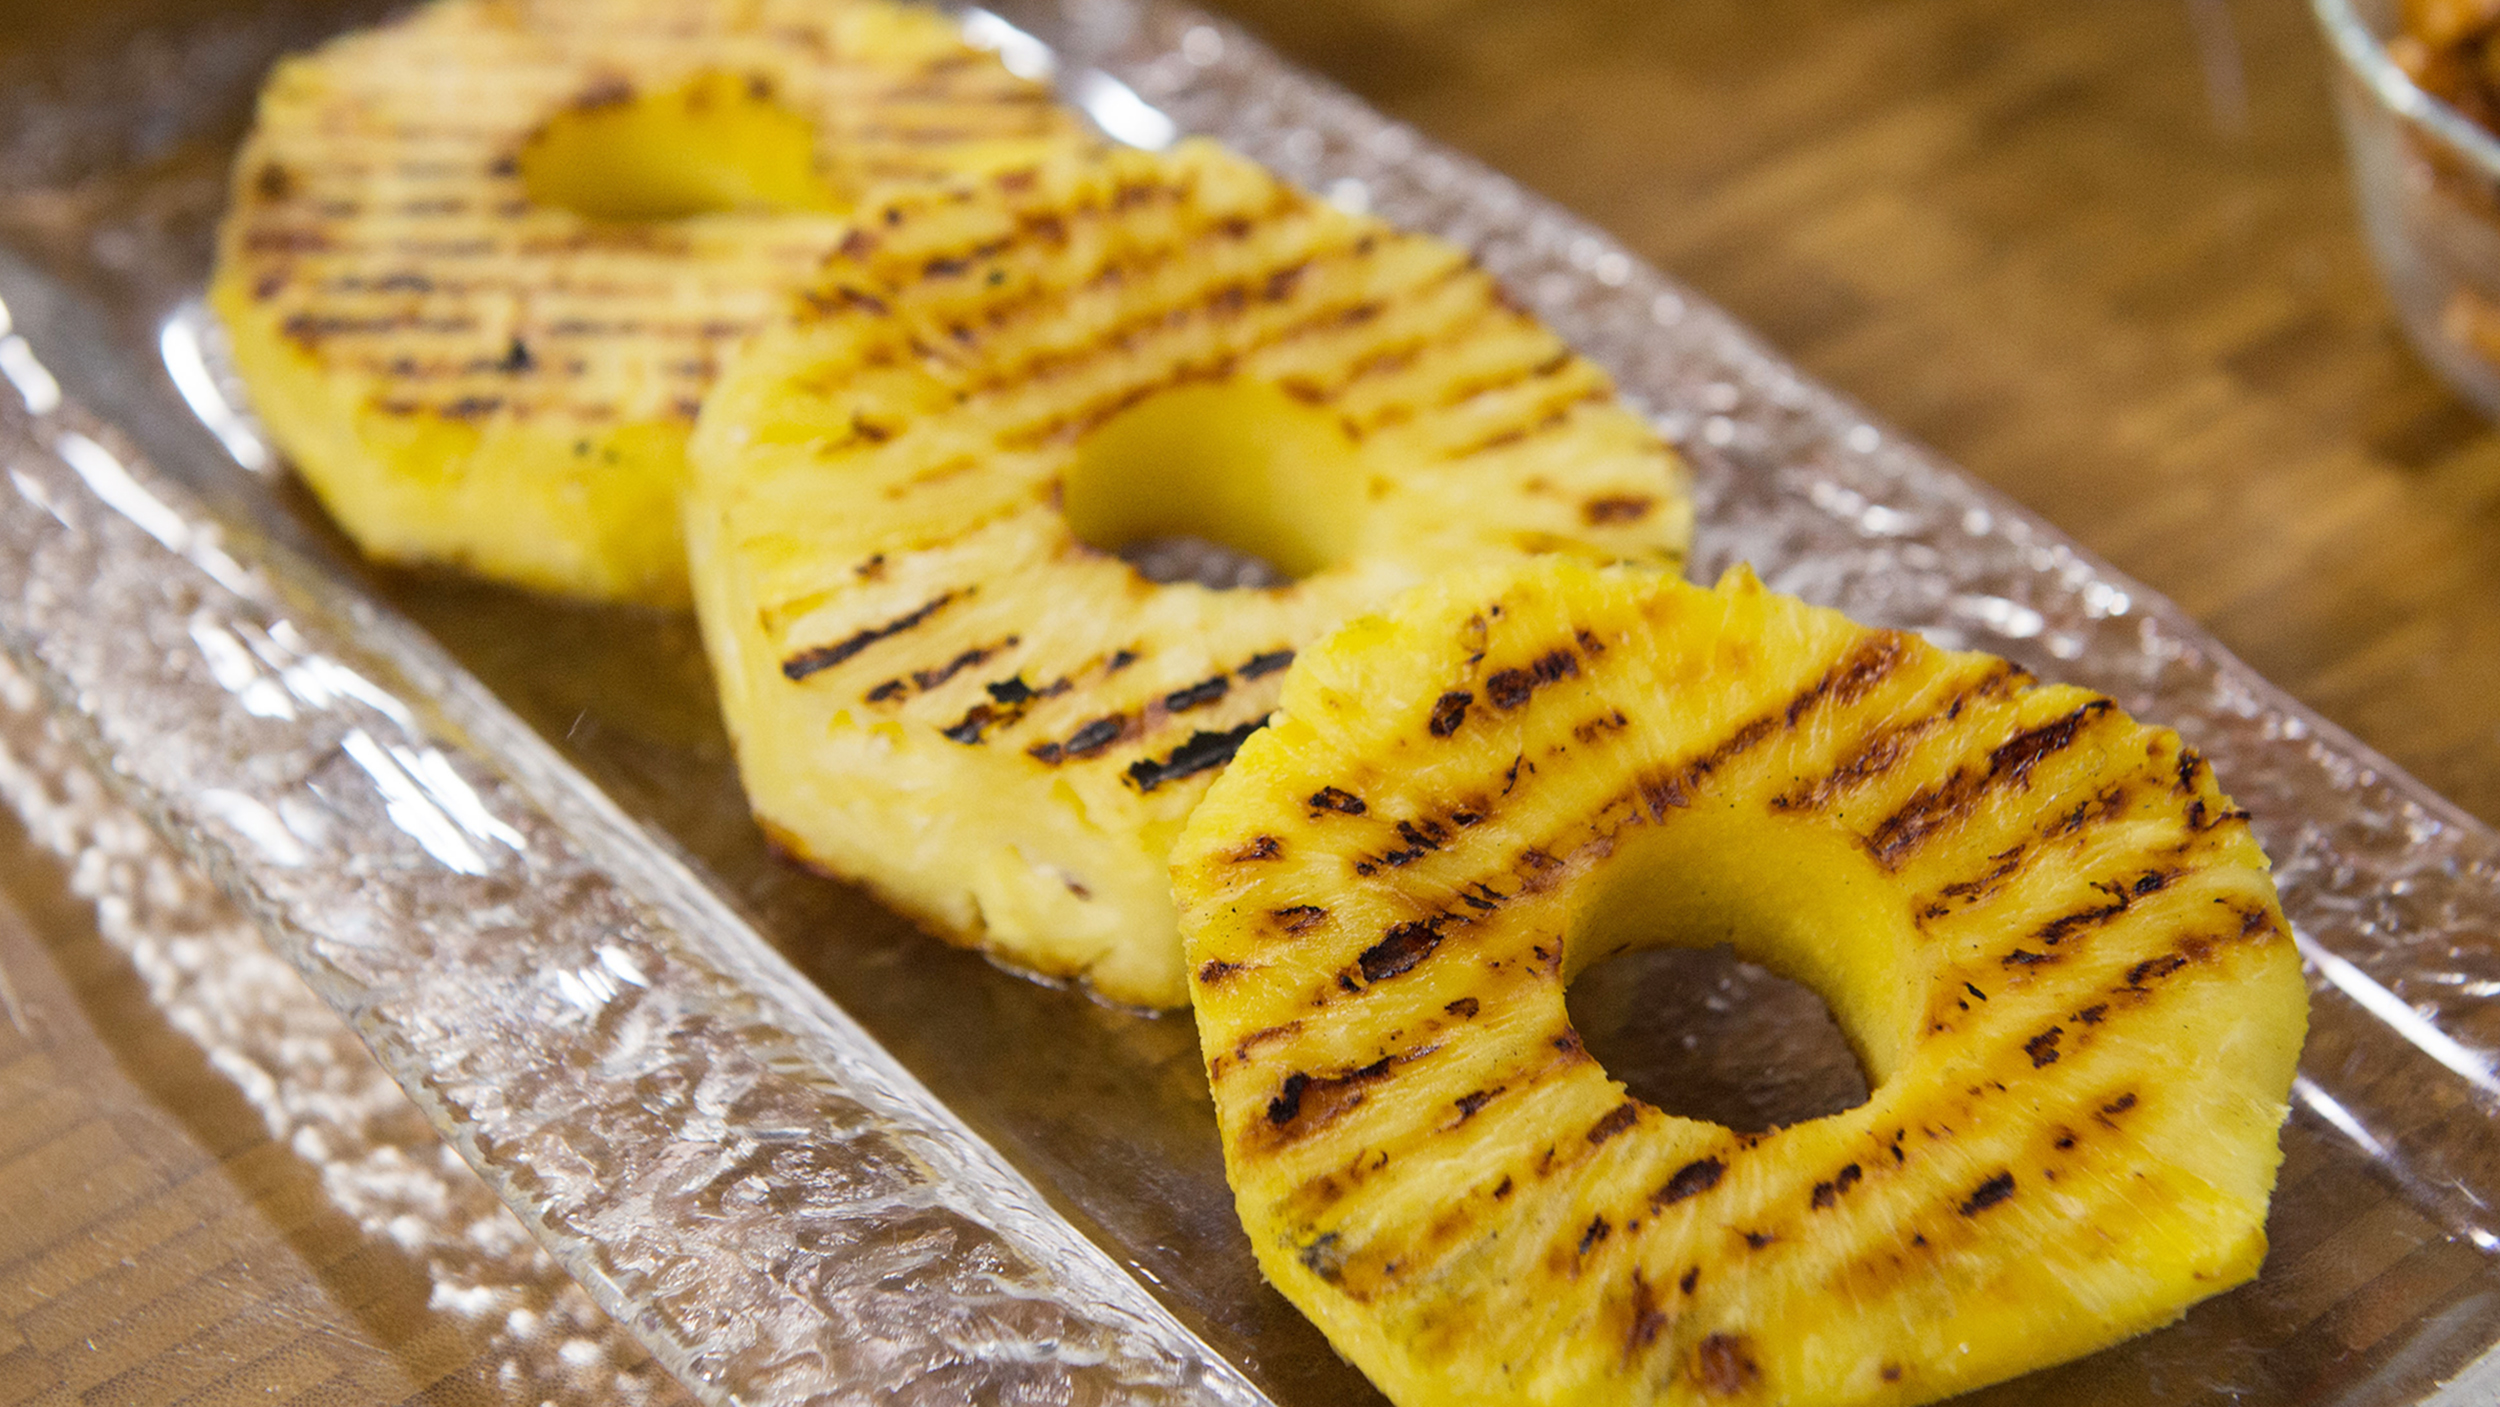 Grilled Pineapple with Candied Cashews - TODAY.com